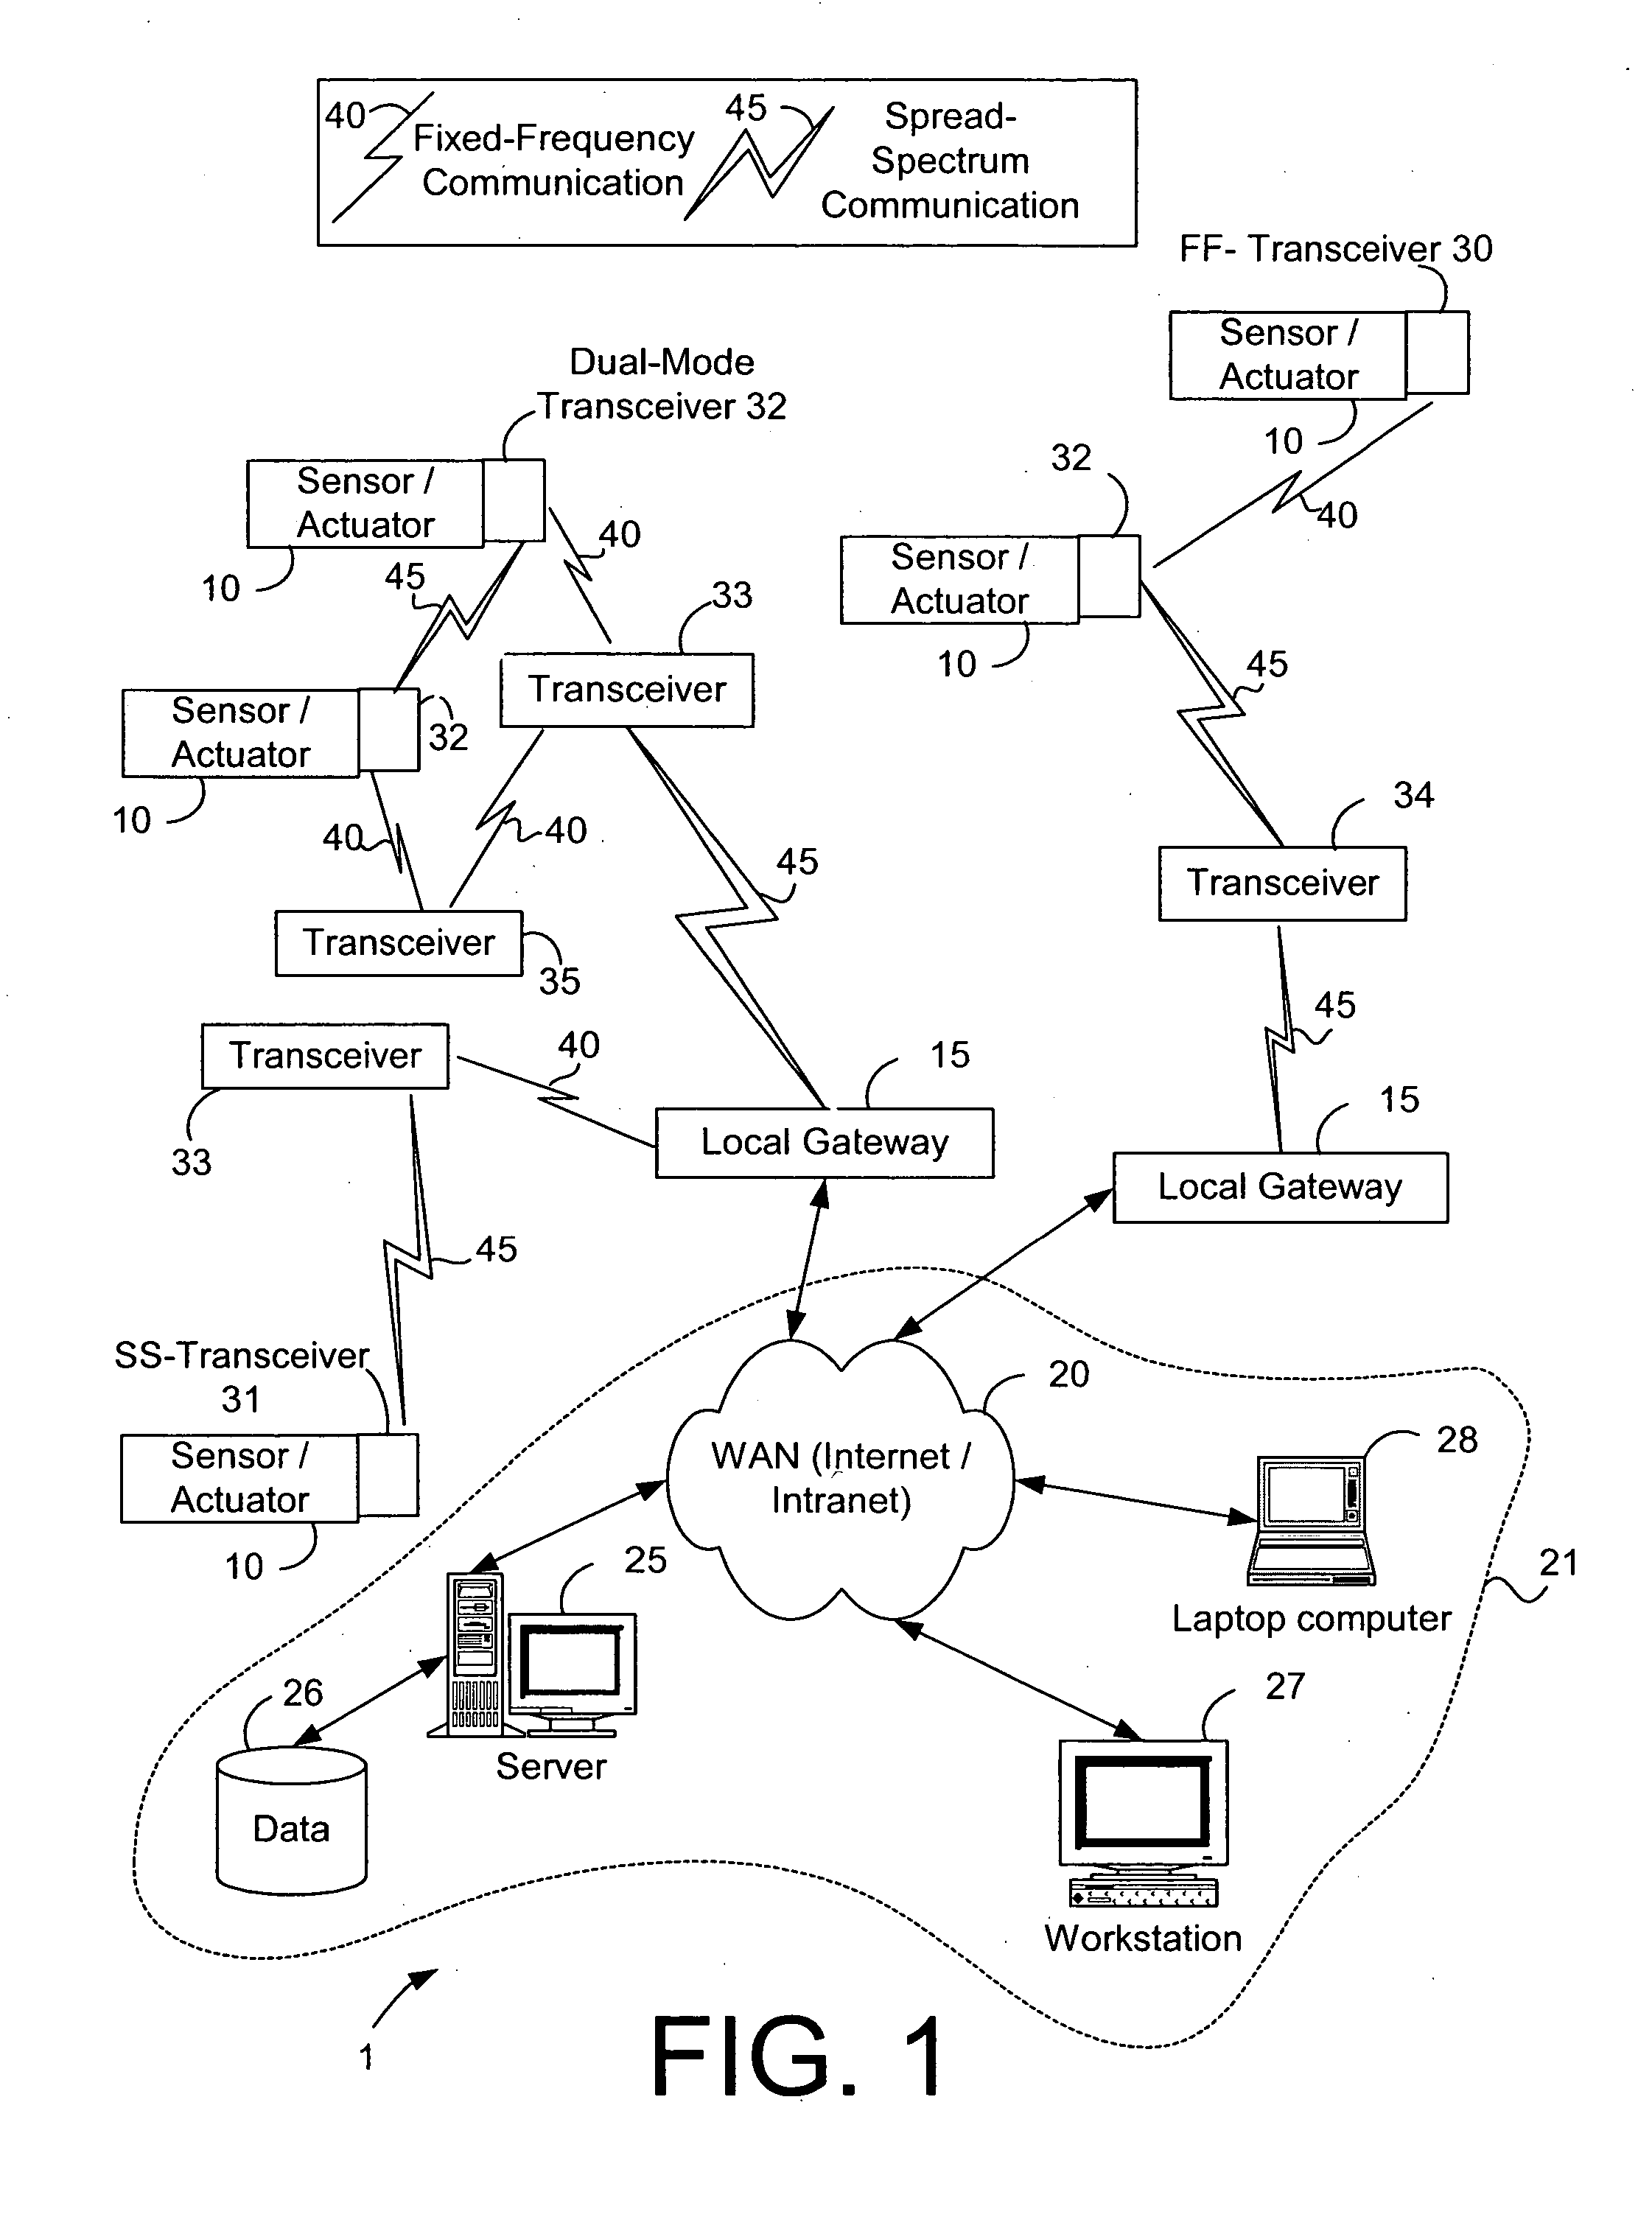 System and method for monitoring remote devices with a dual-mode wireless communication protocol